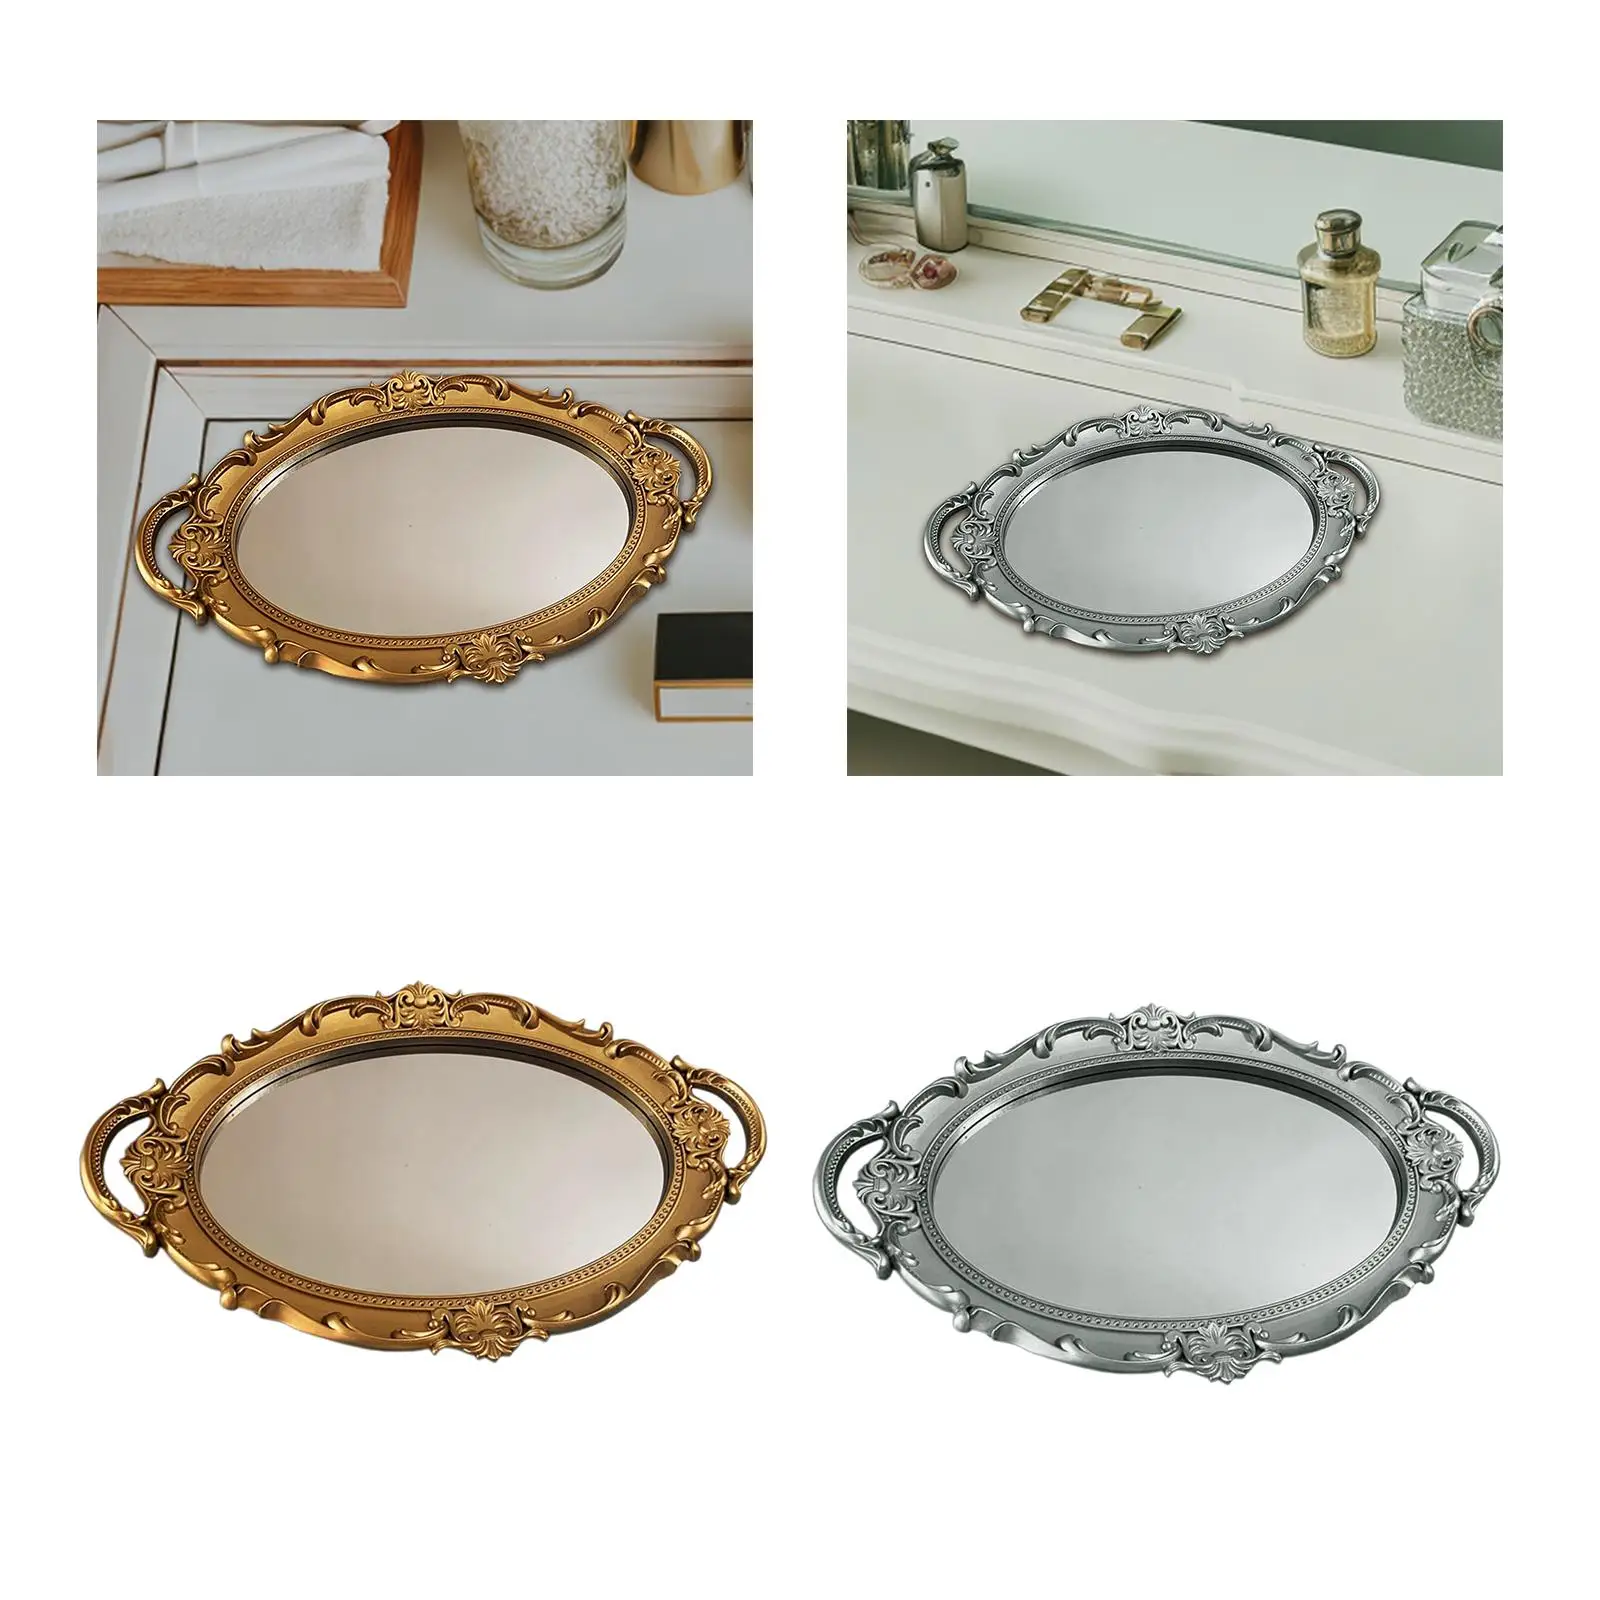 Decorative Mirror Tray Earrings Necklace Display Plates for Desk Desktop